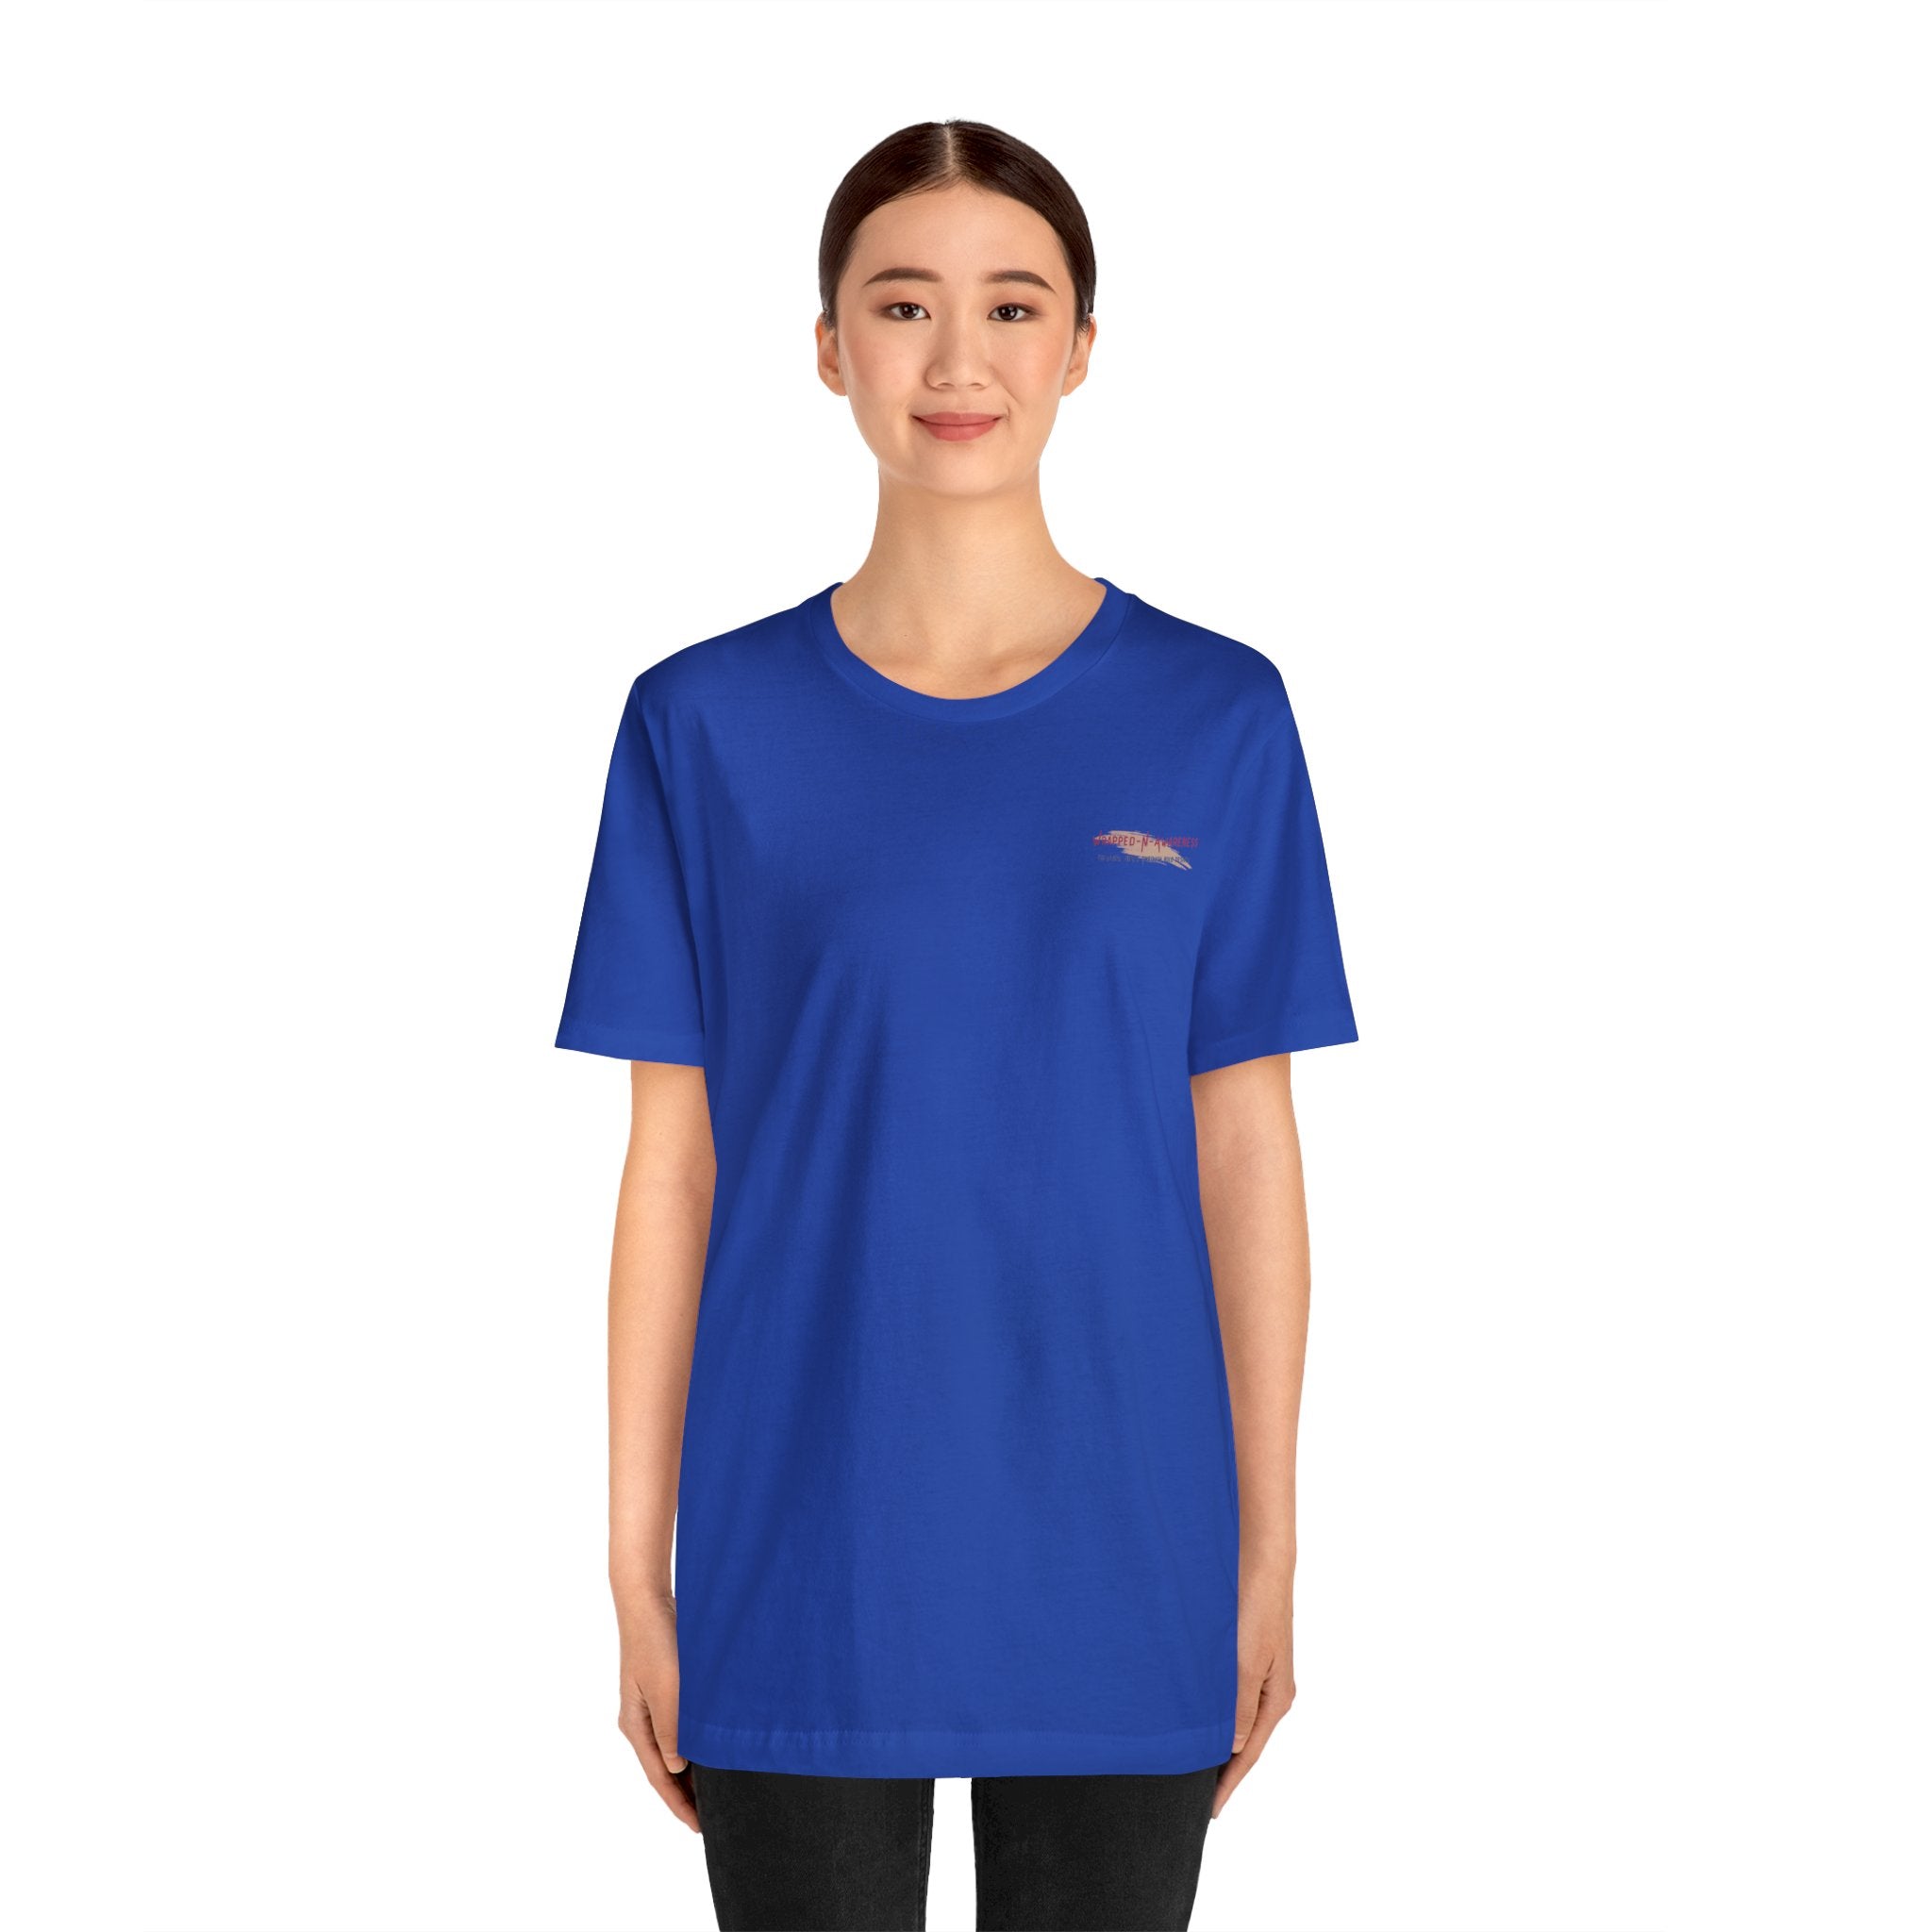 Mindfulness Heals Wounds Tee - Bella+Canvas 3001 Turquoise Airlume Cotton Bella+Canvas 3001 Crew Neckline Jersey Short Sleeve Lightweight Fabric Mental Health Support Retail Fit Tear-away Label Tee Unisex Tee T-Shirt 18381867878814582261_2048 Printify